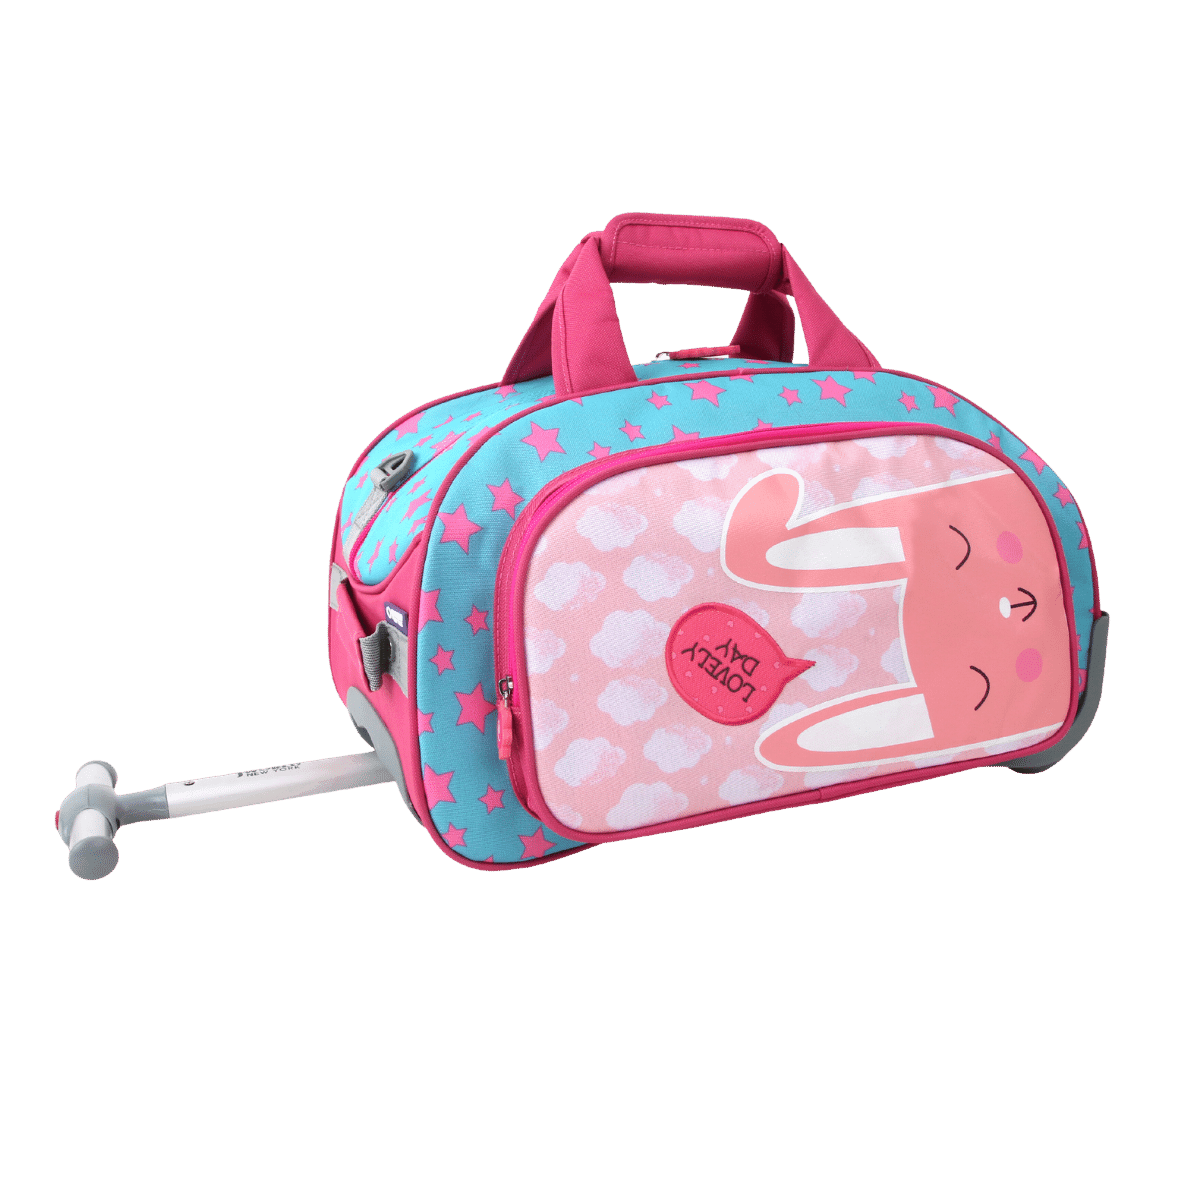 travel bag with wheels